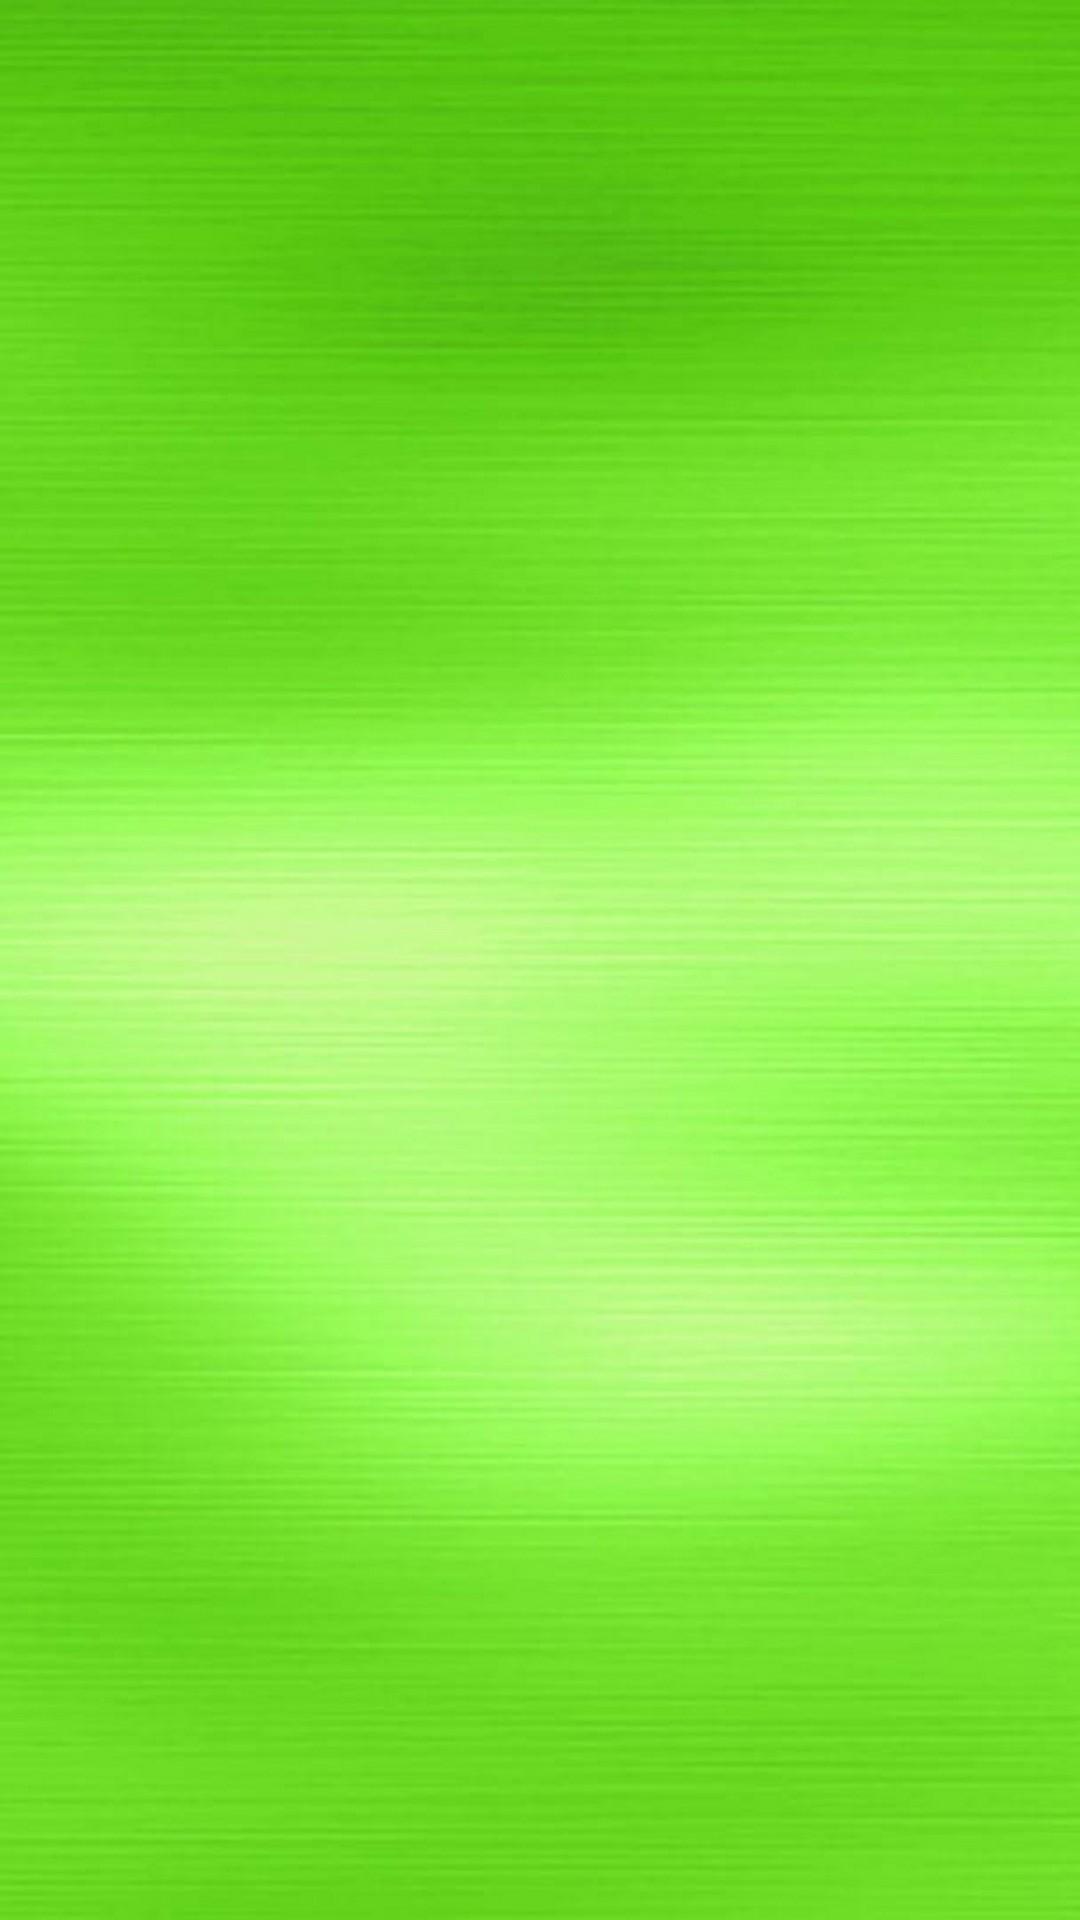 Android Wallpaper HD Light Green Android Wallpaper